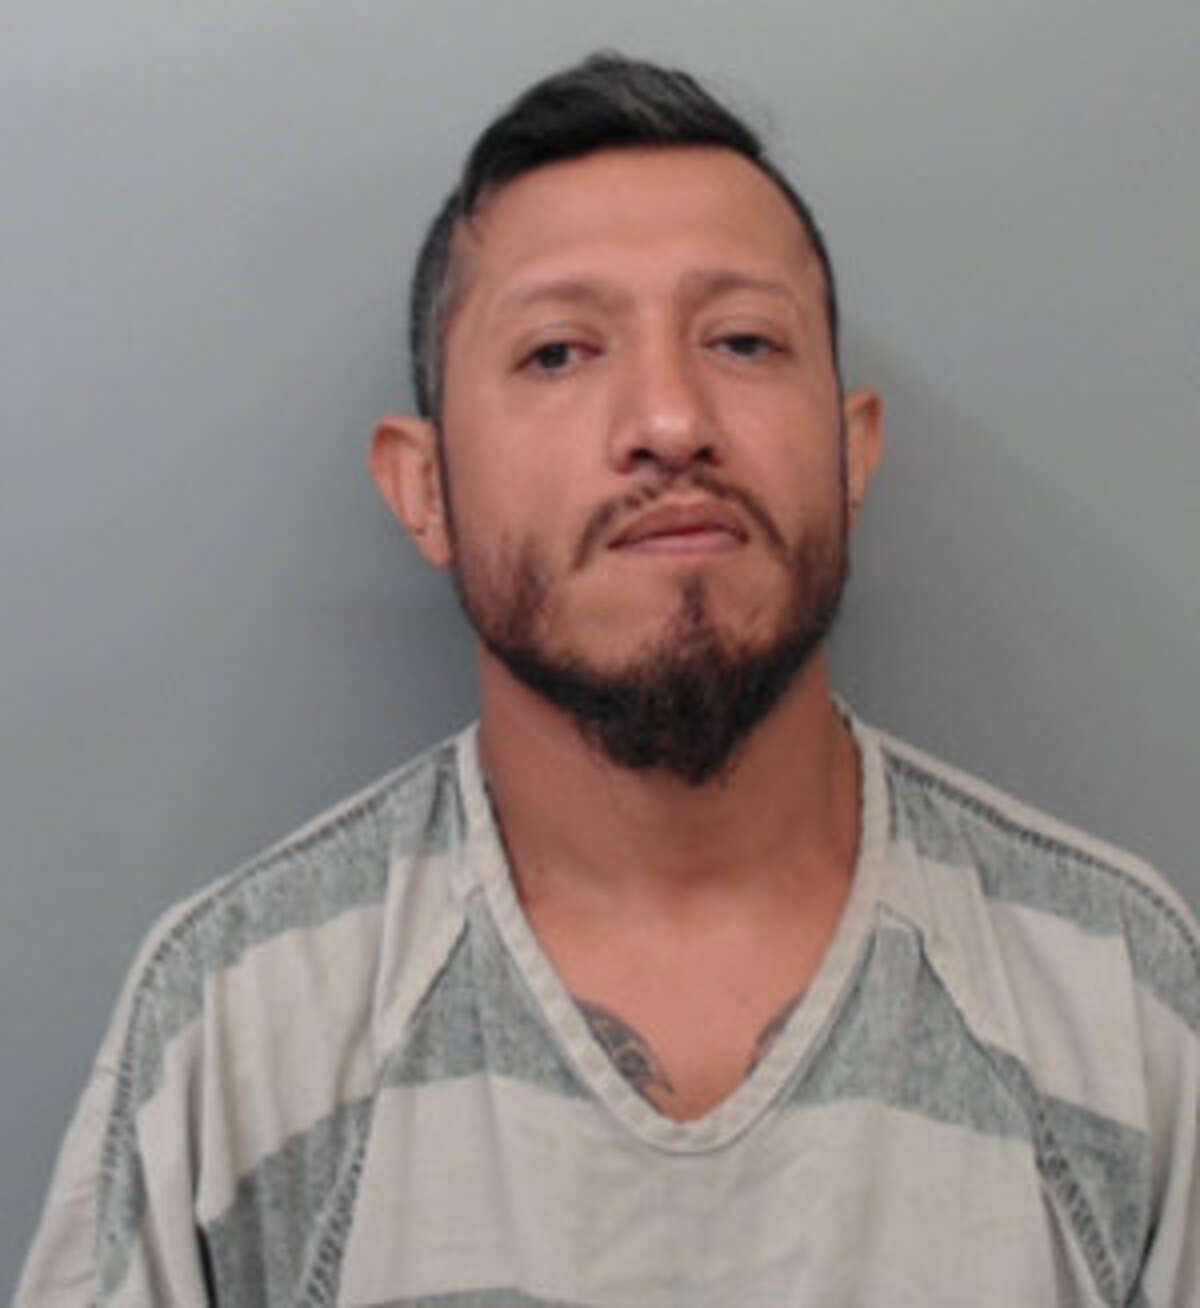 Joaquin Morales, 37, was the first inmate to be charged in the Dec. 11 Webb County Jail riot. Keep scrolling to see the other 24 inmates expected to face charges >>>>